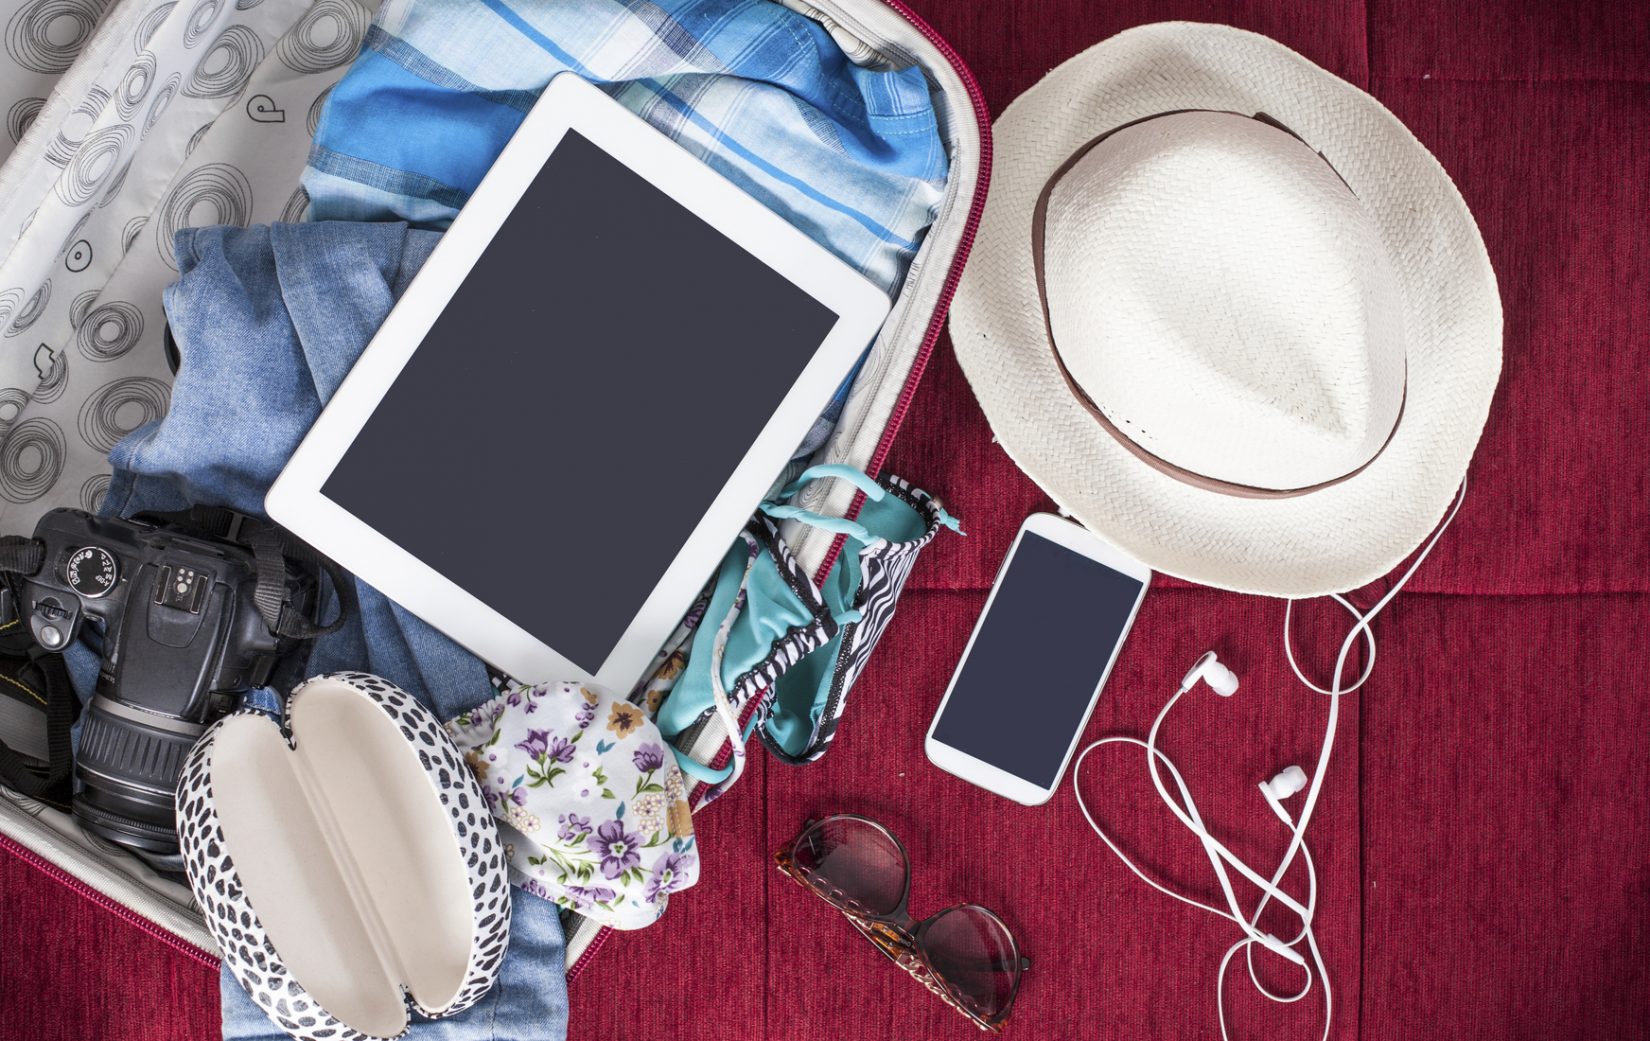 9 Travel Gadgets To Pack For Your Next Vacation